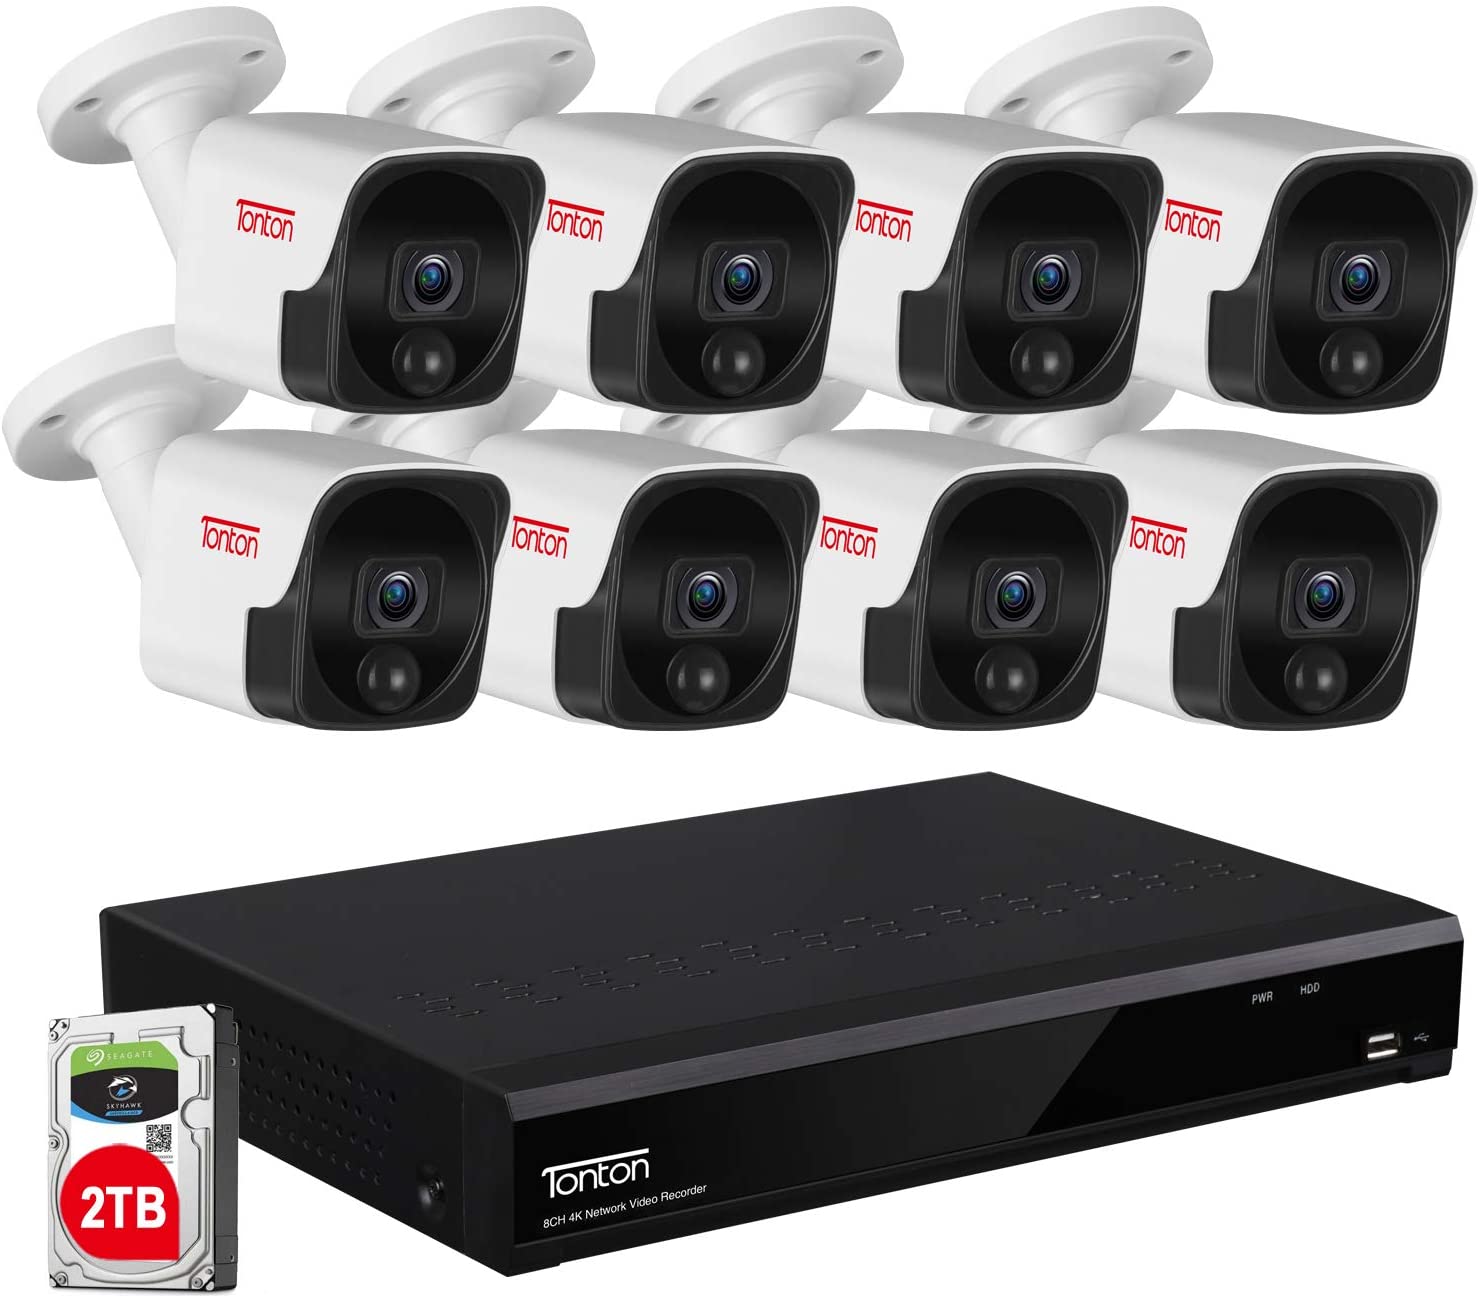 Tonton 1080P Surveillance Camera System Outdoor,8CH 1080P DVR Recorder with 4PCS 2MP Waterproof Bullet Camera and 4PCS Dome Camera,Smart Motion Detection and Alerts,Metal Housing,Easy Remote Access 